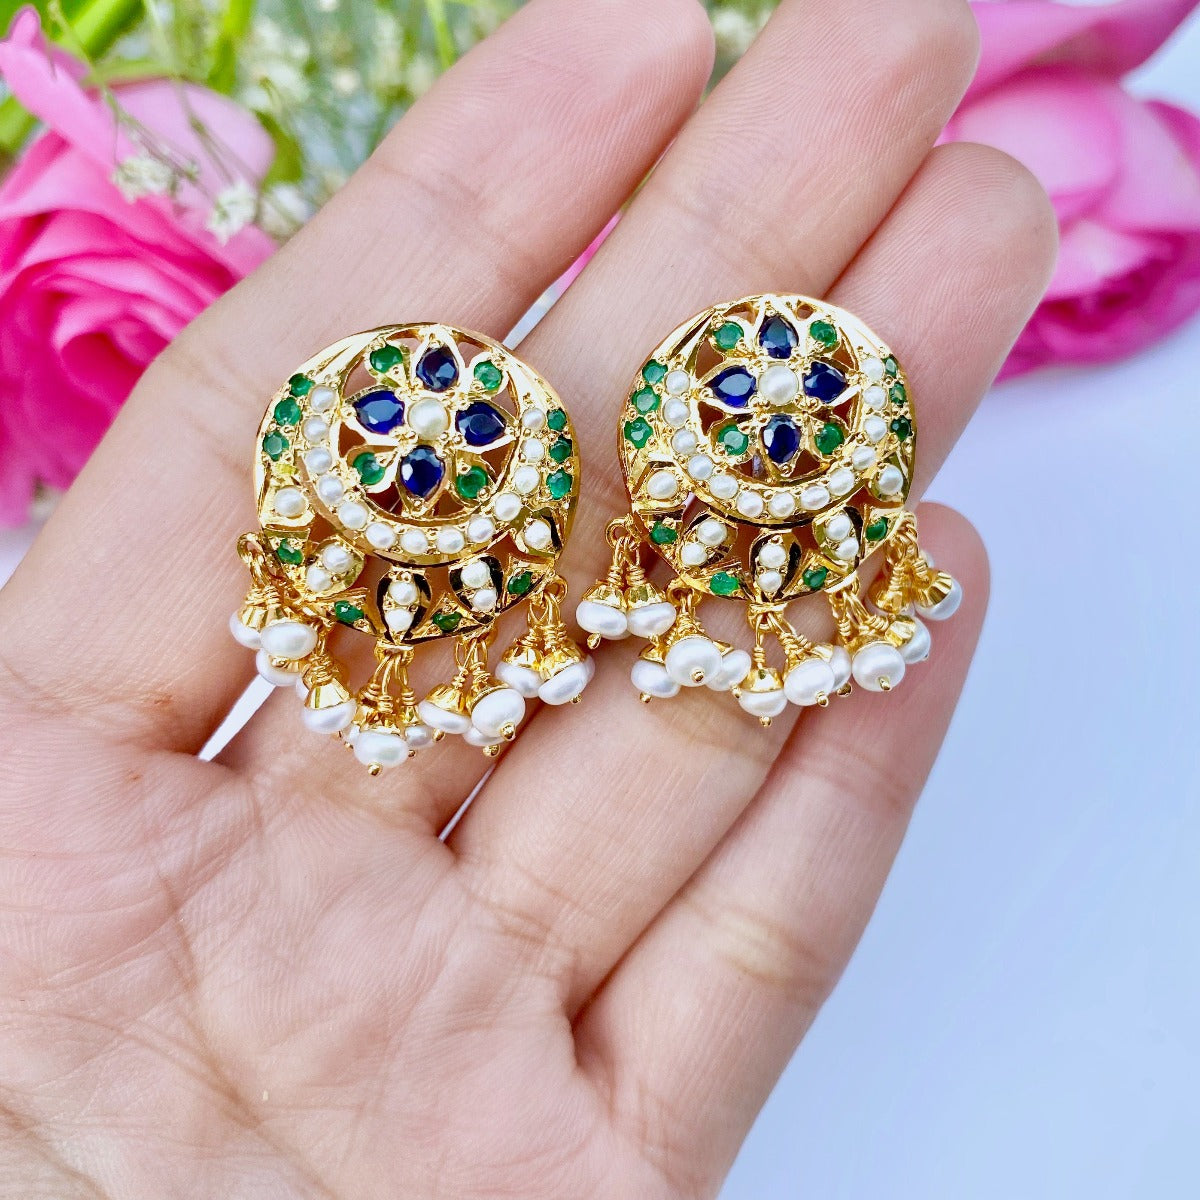 Indian round tops earrings